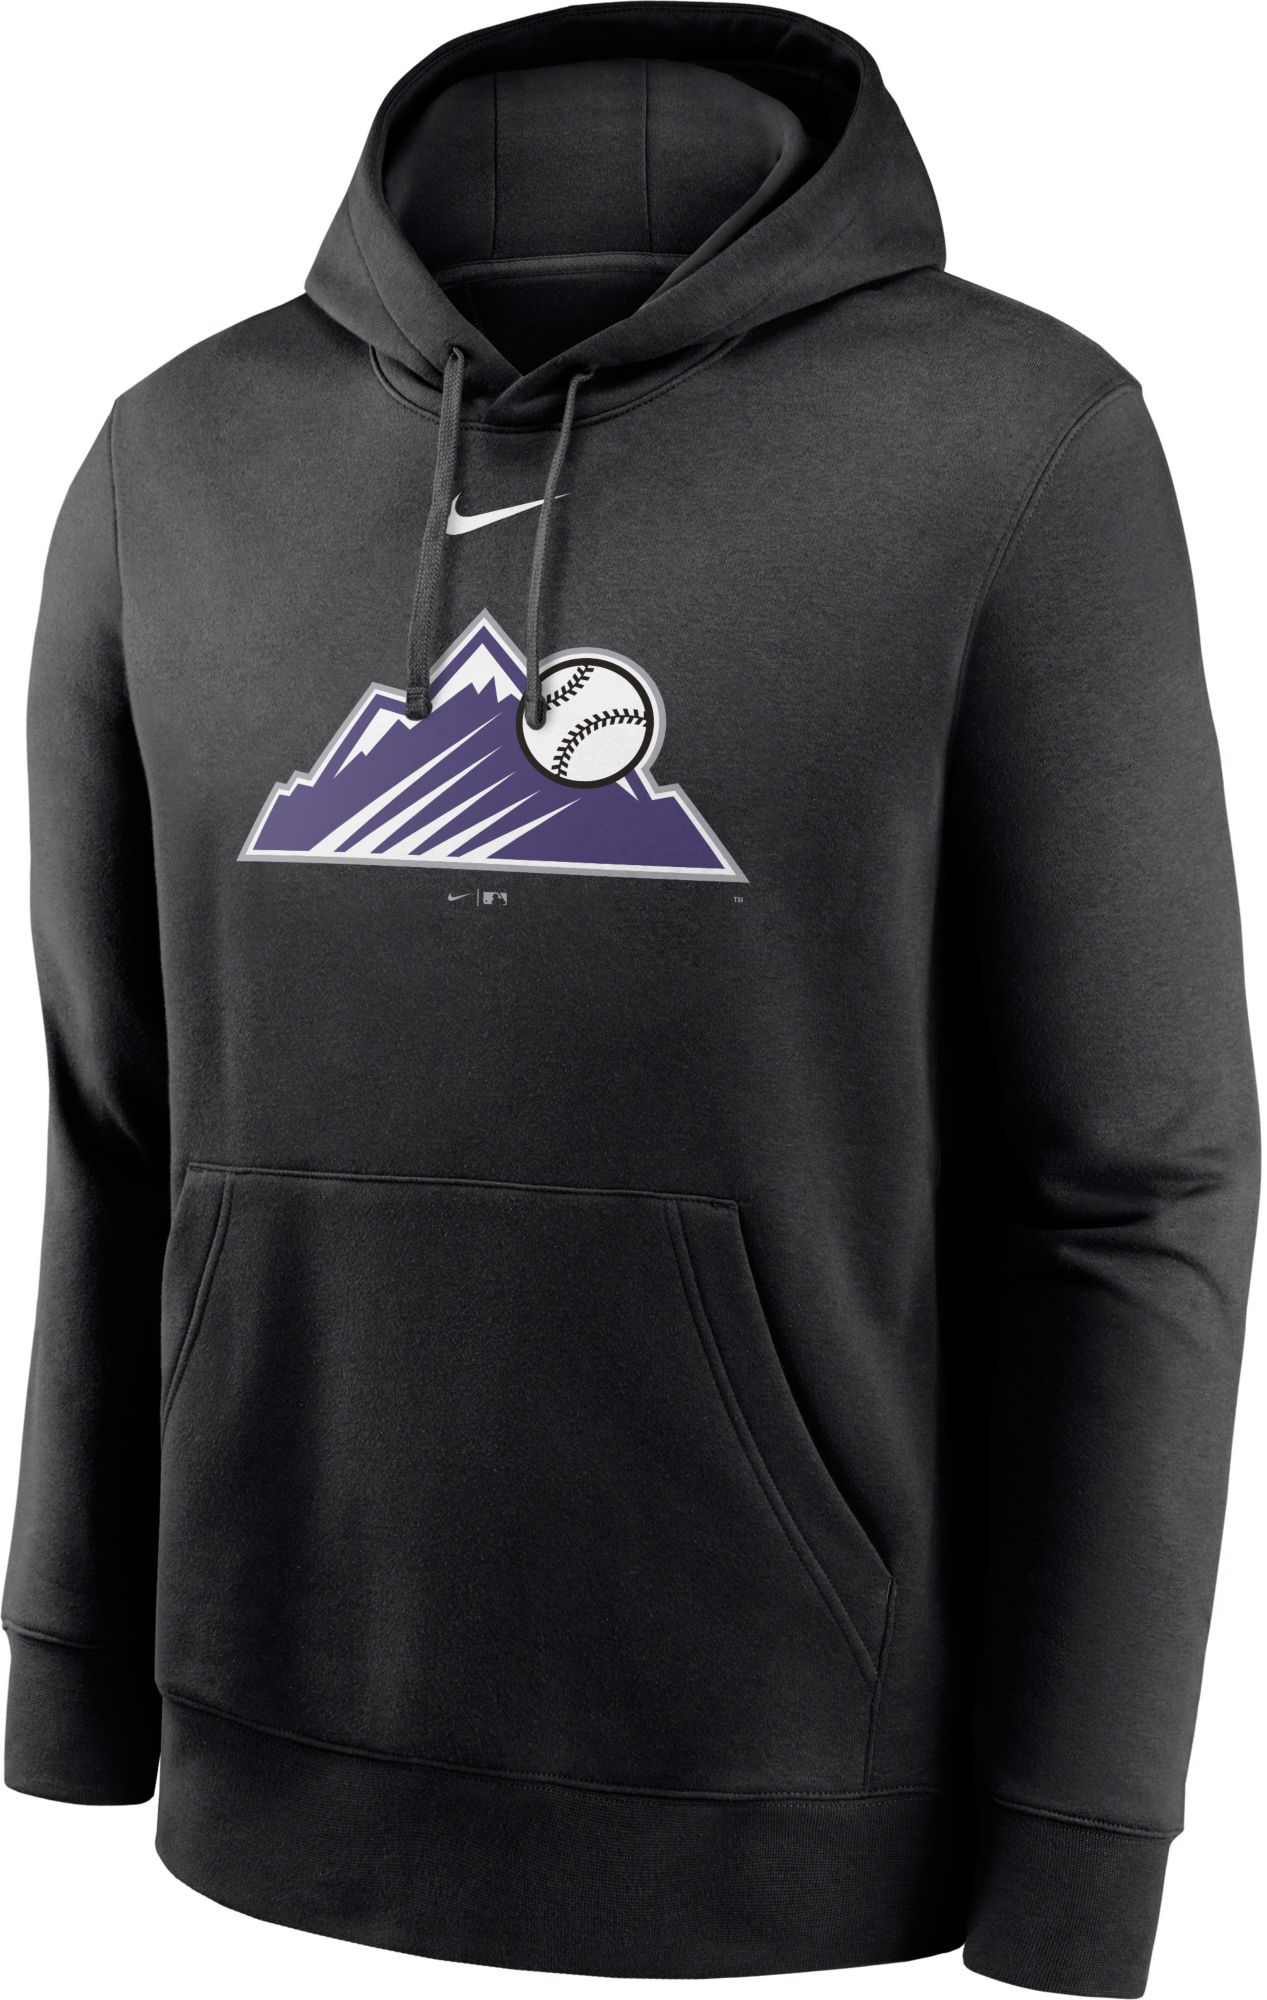 Colorado Rockies Gray Road Authentic Jersey by Nike